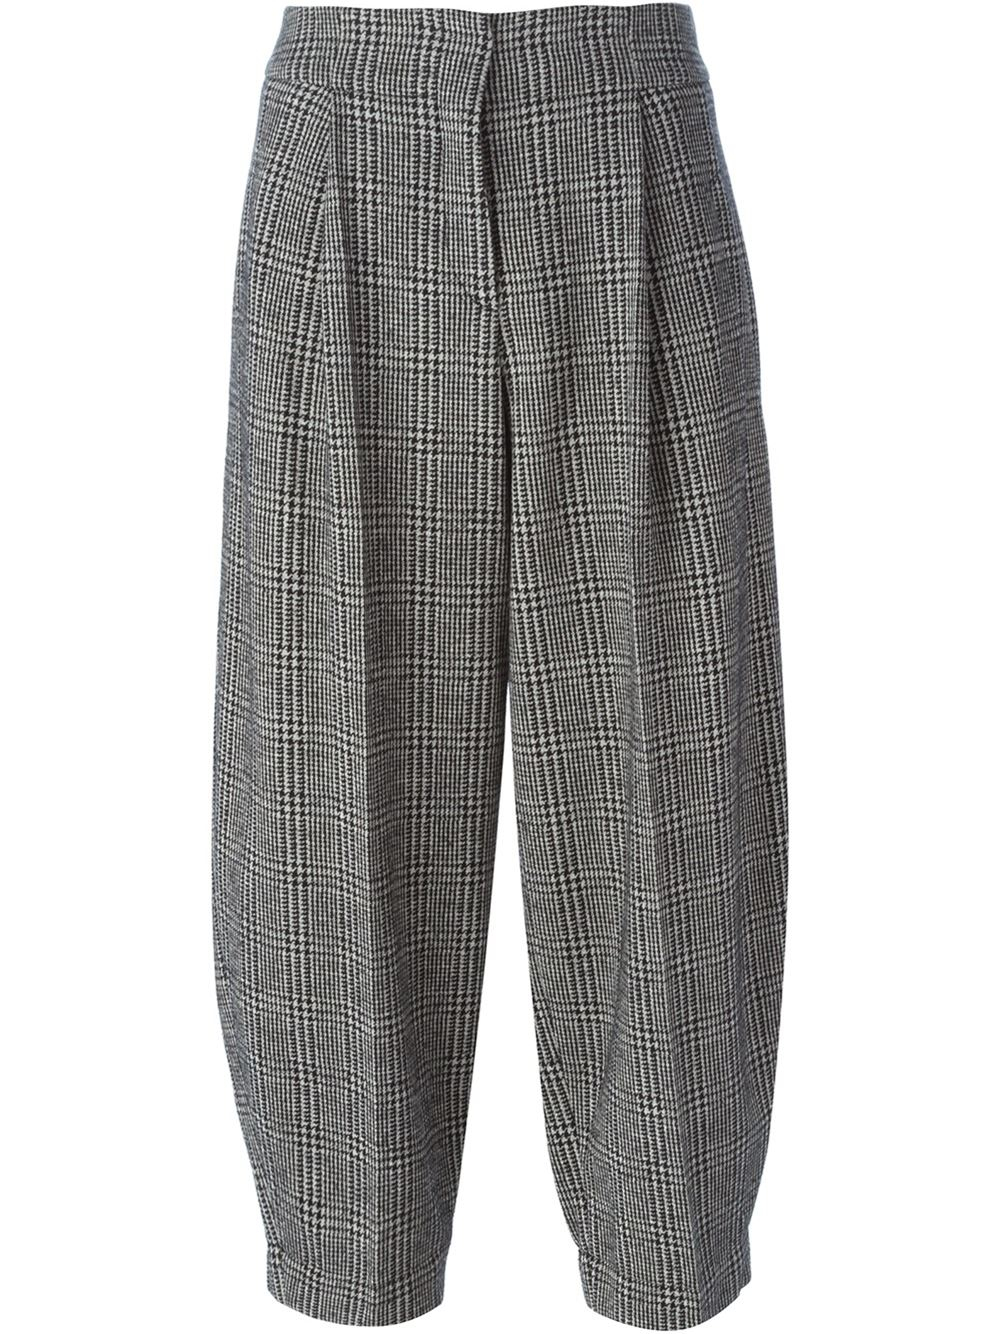 Odeeh Houndstooth Puffy Trousers in Gray (black) | Lyst